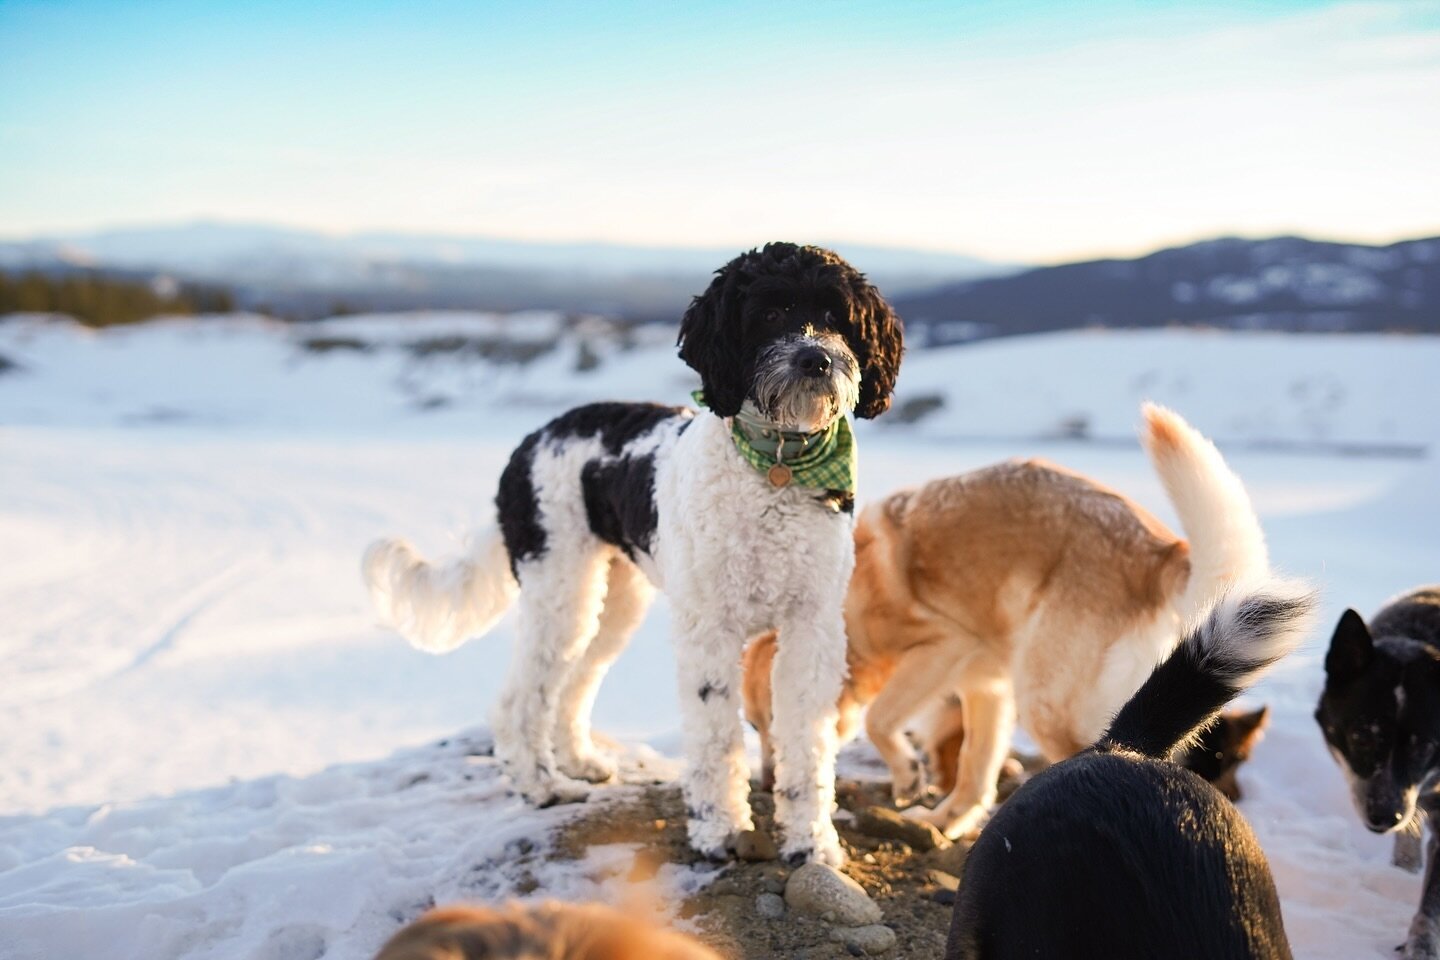 FawkesTrot Feature - ✨ Hazy May ✨
A la @fawkestrot.rhiannon we were inspired by the warm weather and light to give some of our members moments in the sun! This lil bundle of curls is Hazy. She is a bichon springer spaniel mix. No you haven&rsquo;t me